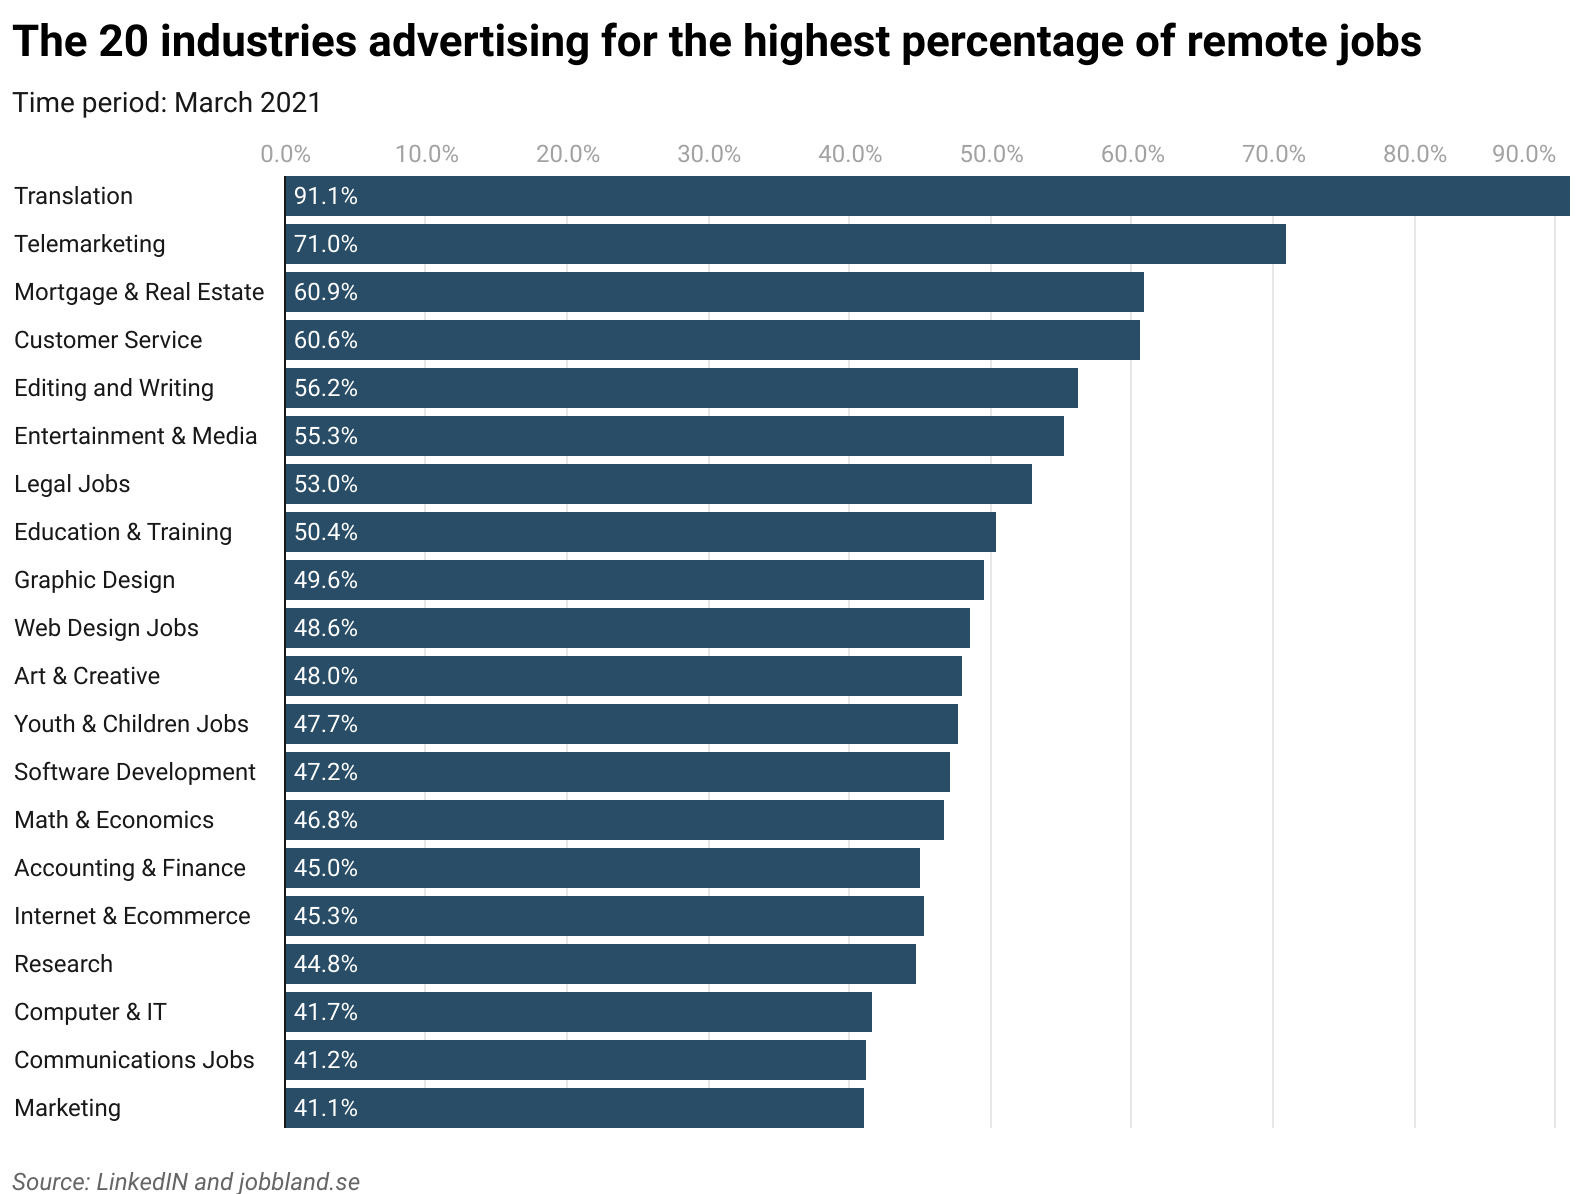 TlzJ8 the 20 industries advertising for the highest percentage of remote jobs 